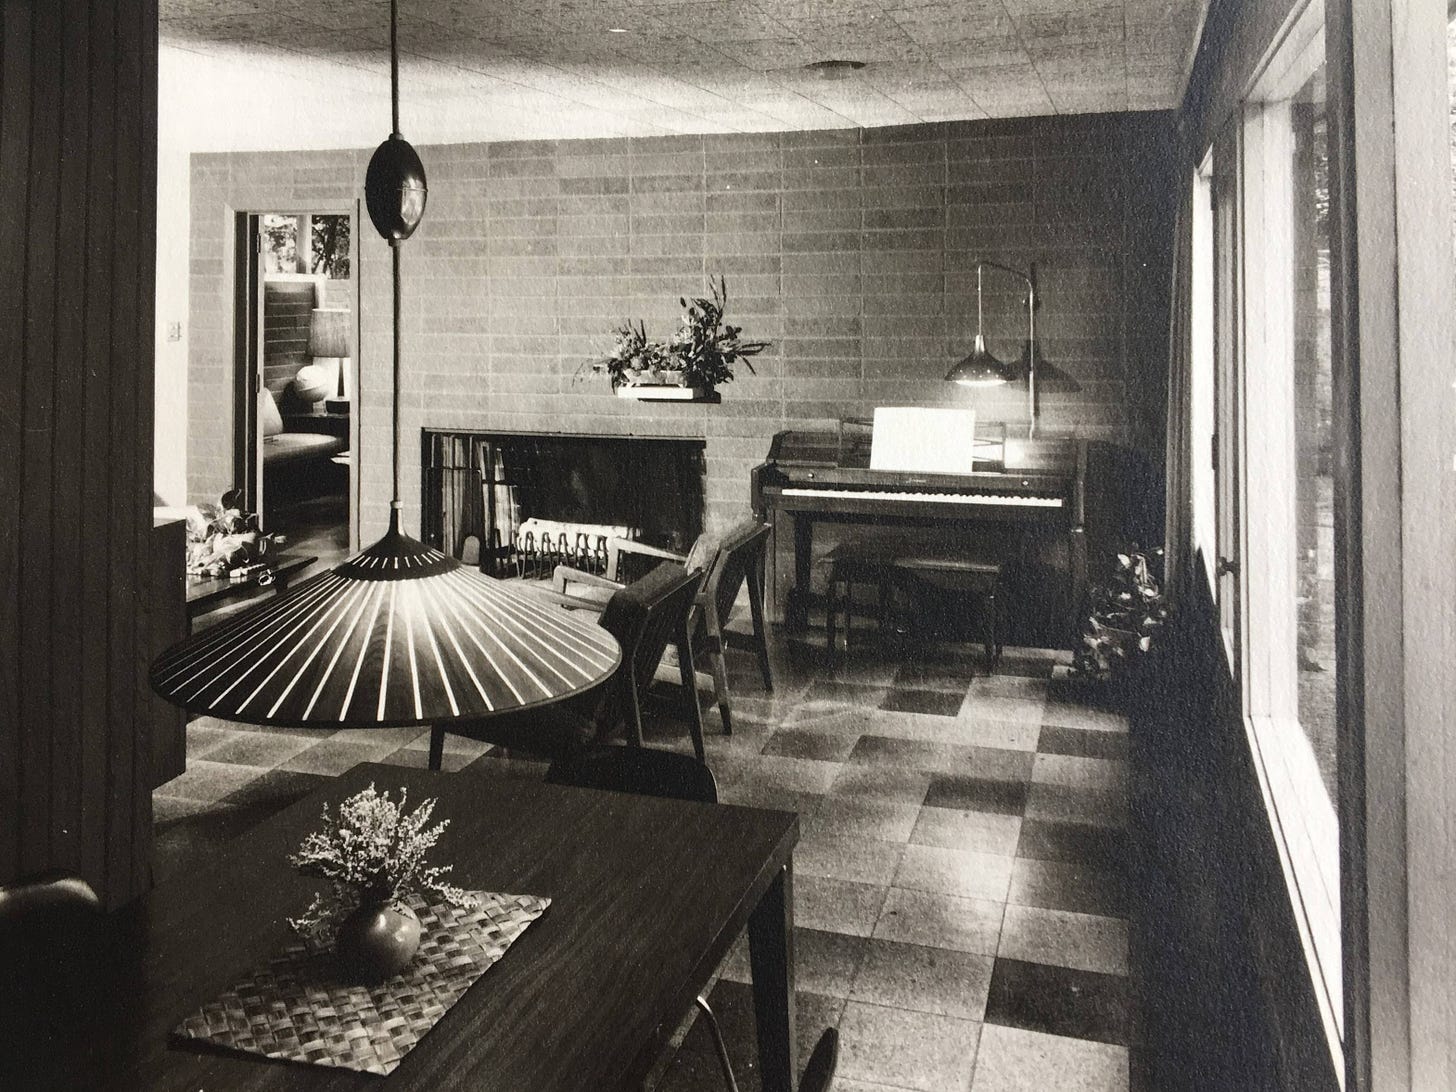 Living room/dining room of the Kenneth C. and Carolyn B. Landry House, circa mid-1960s